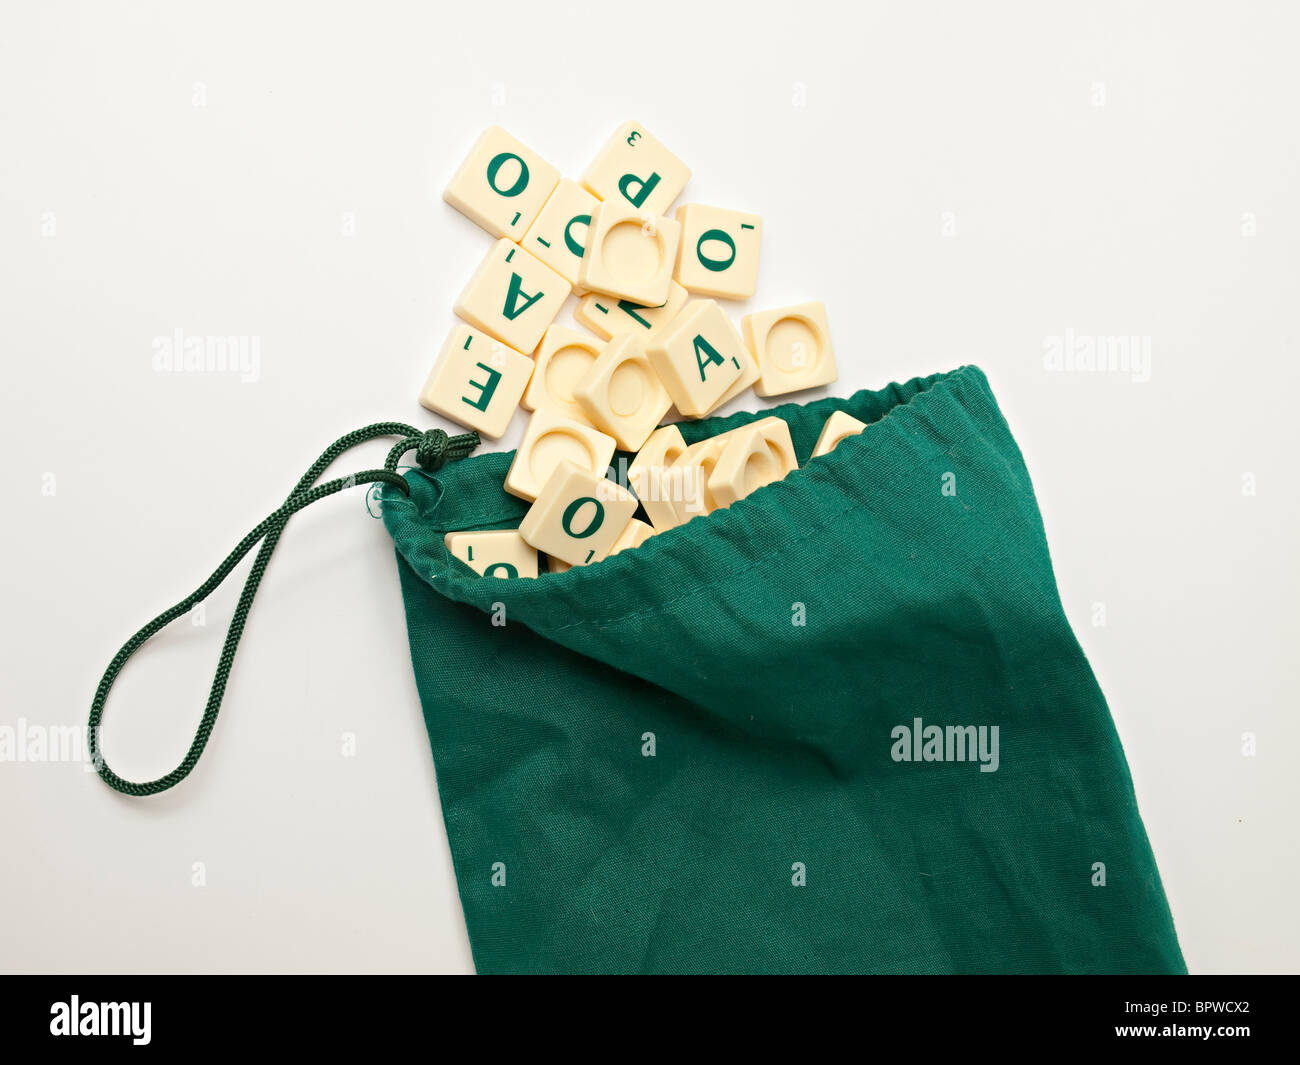 Bag with scrabble tiles falling out Stock Photo